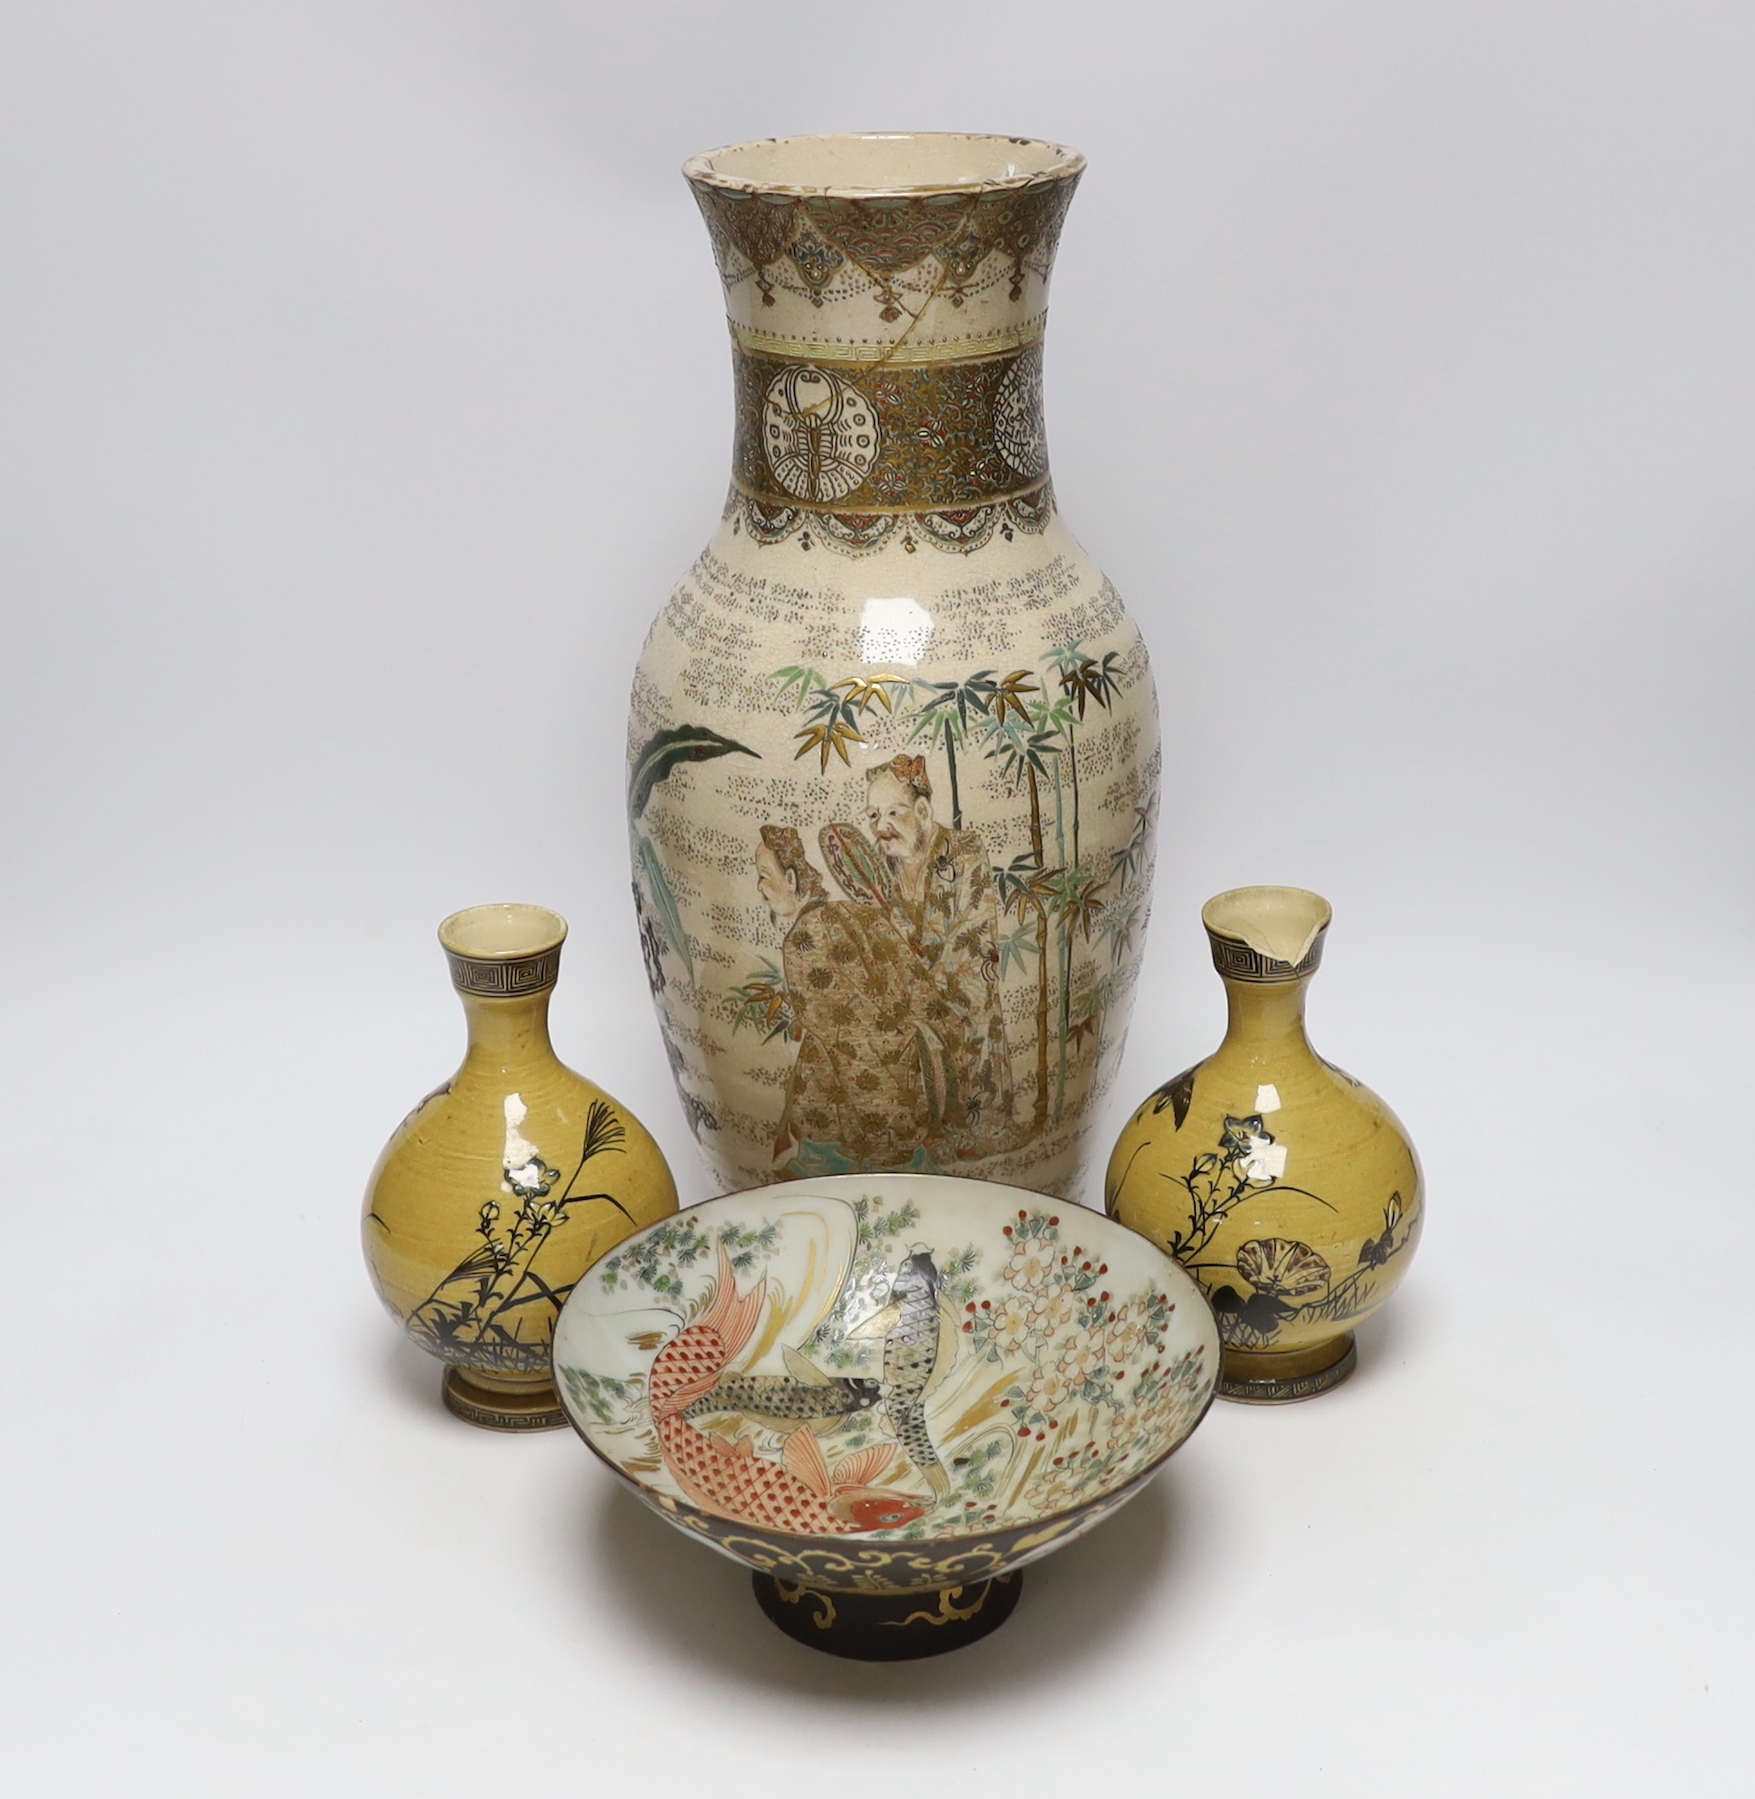 A 19th century Satsuma vase, two ochre pottery vases and a fish designed bowl, (purported to come